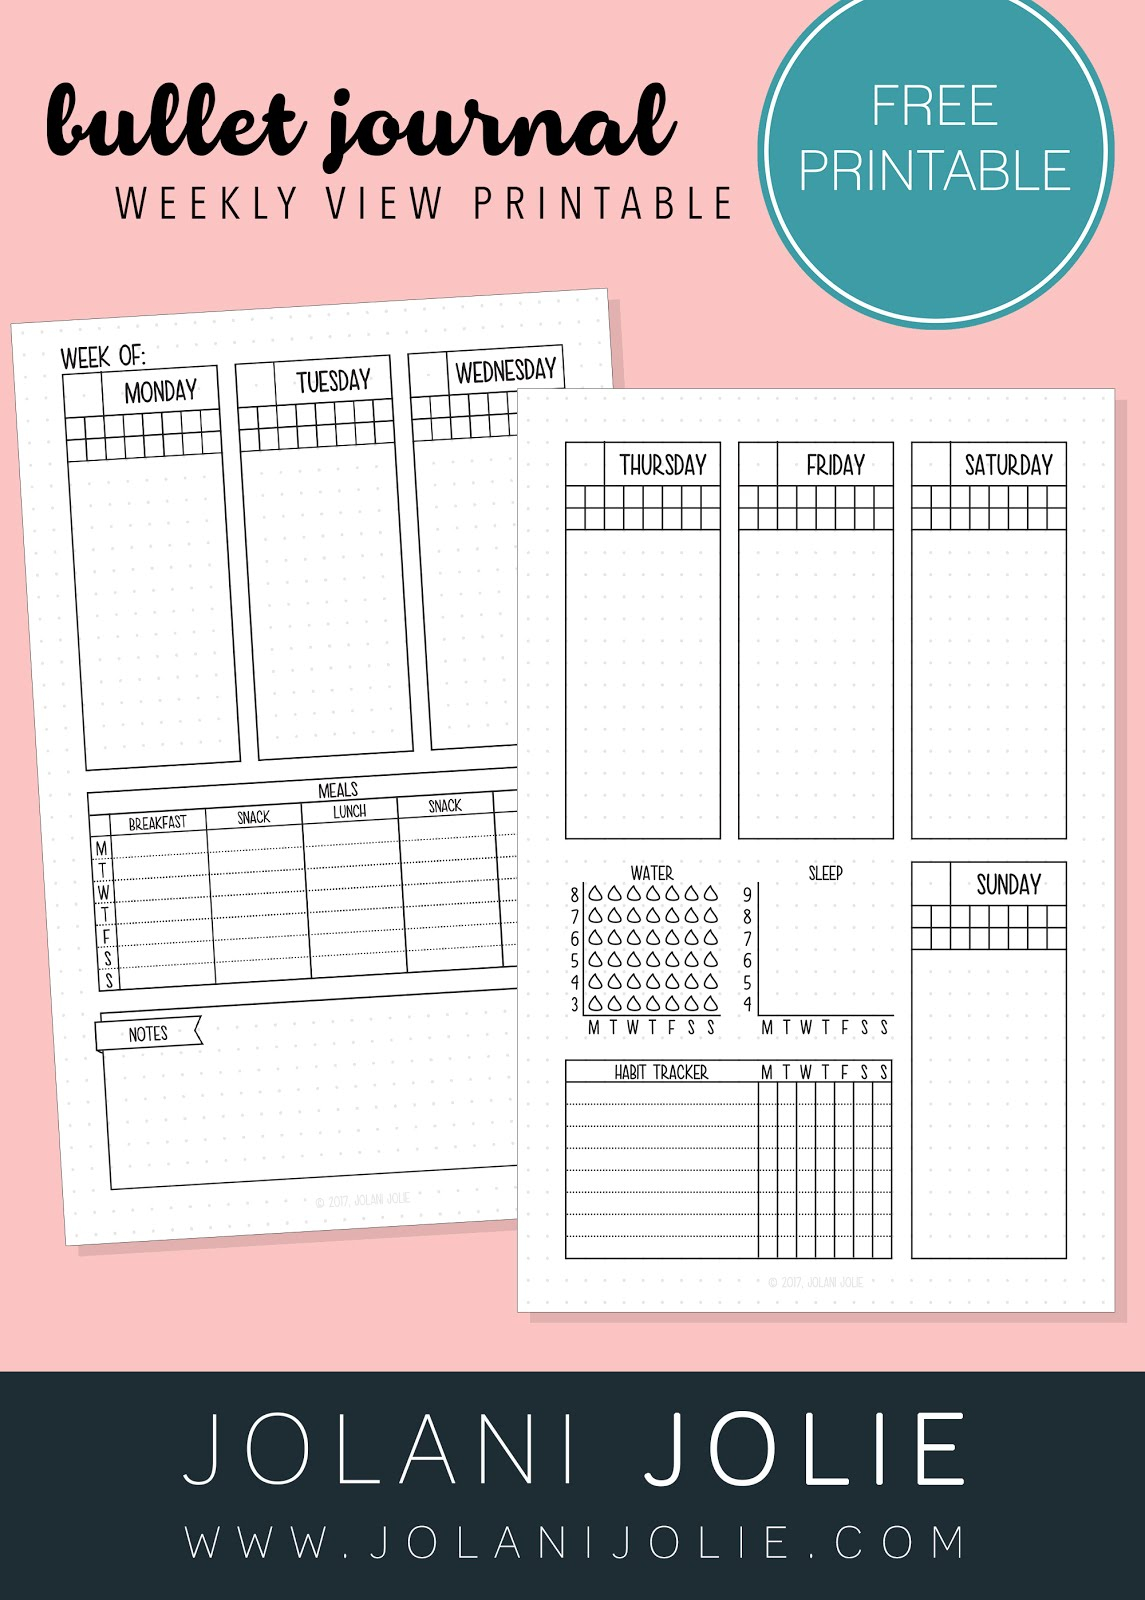 Free Printable Weekly Bullet Journal Overview With Sleep 